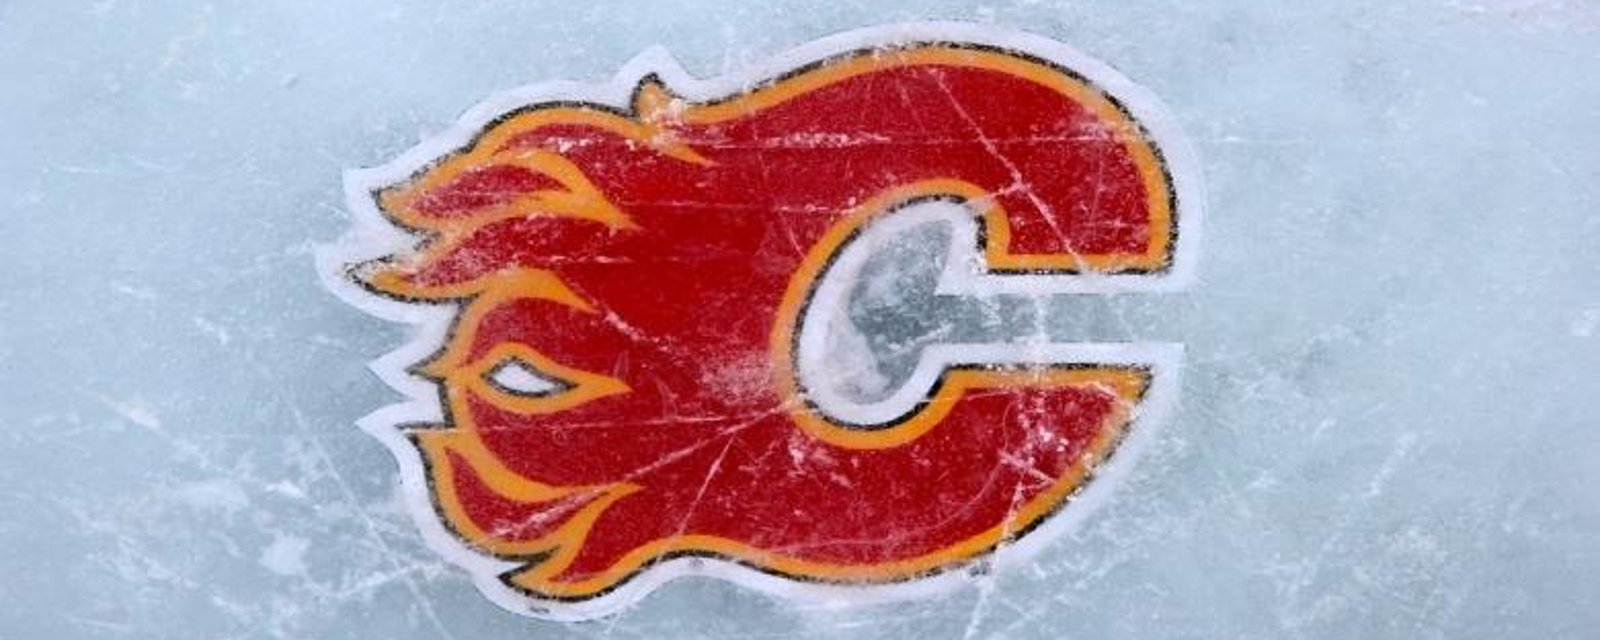 What is in store for the Flames during the final stretch